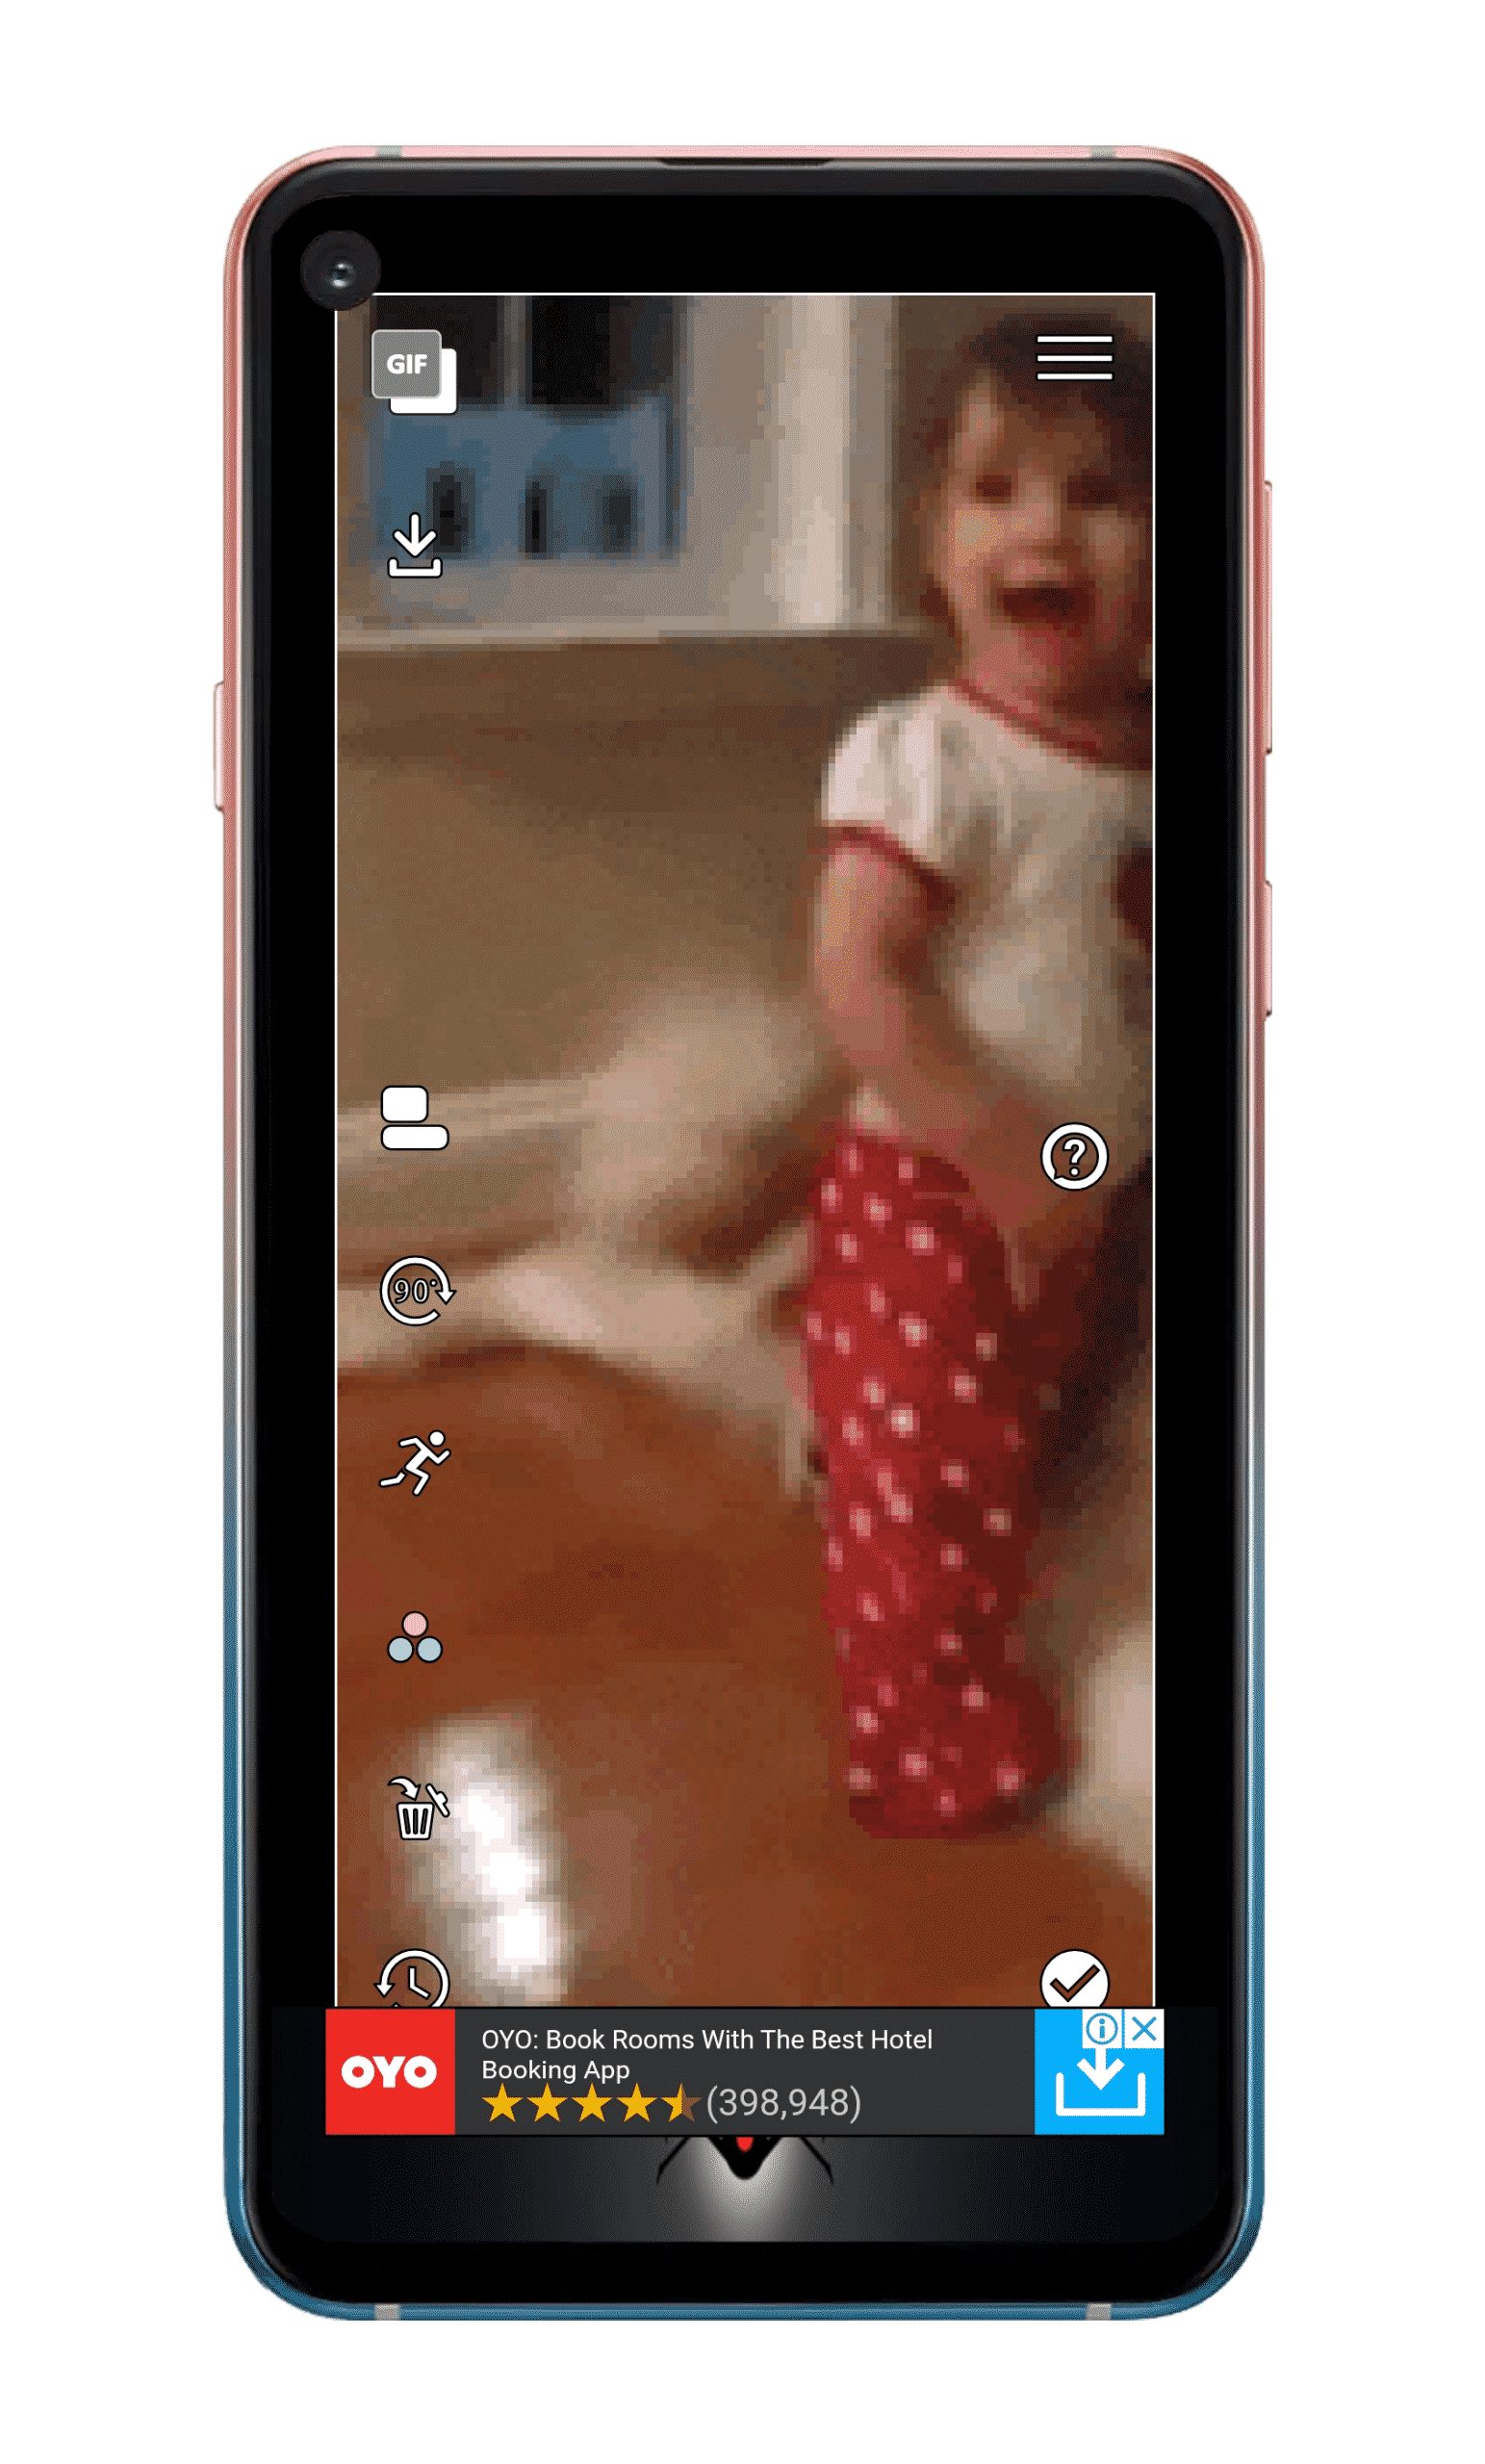 Use a GIF as Live Wallpaper On Android